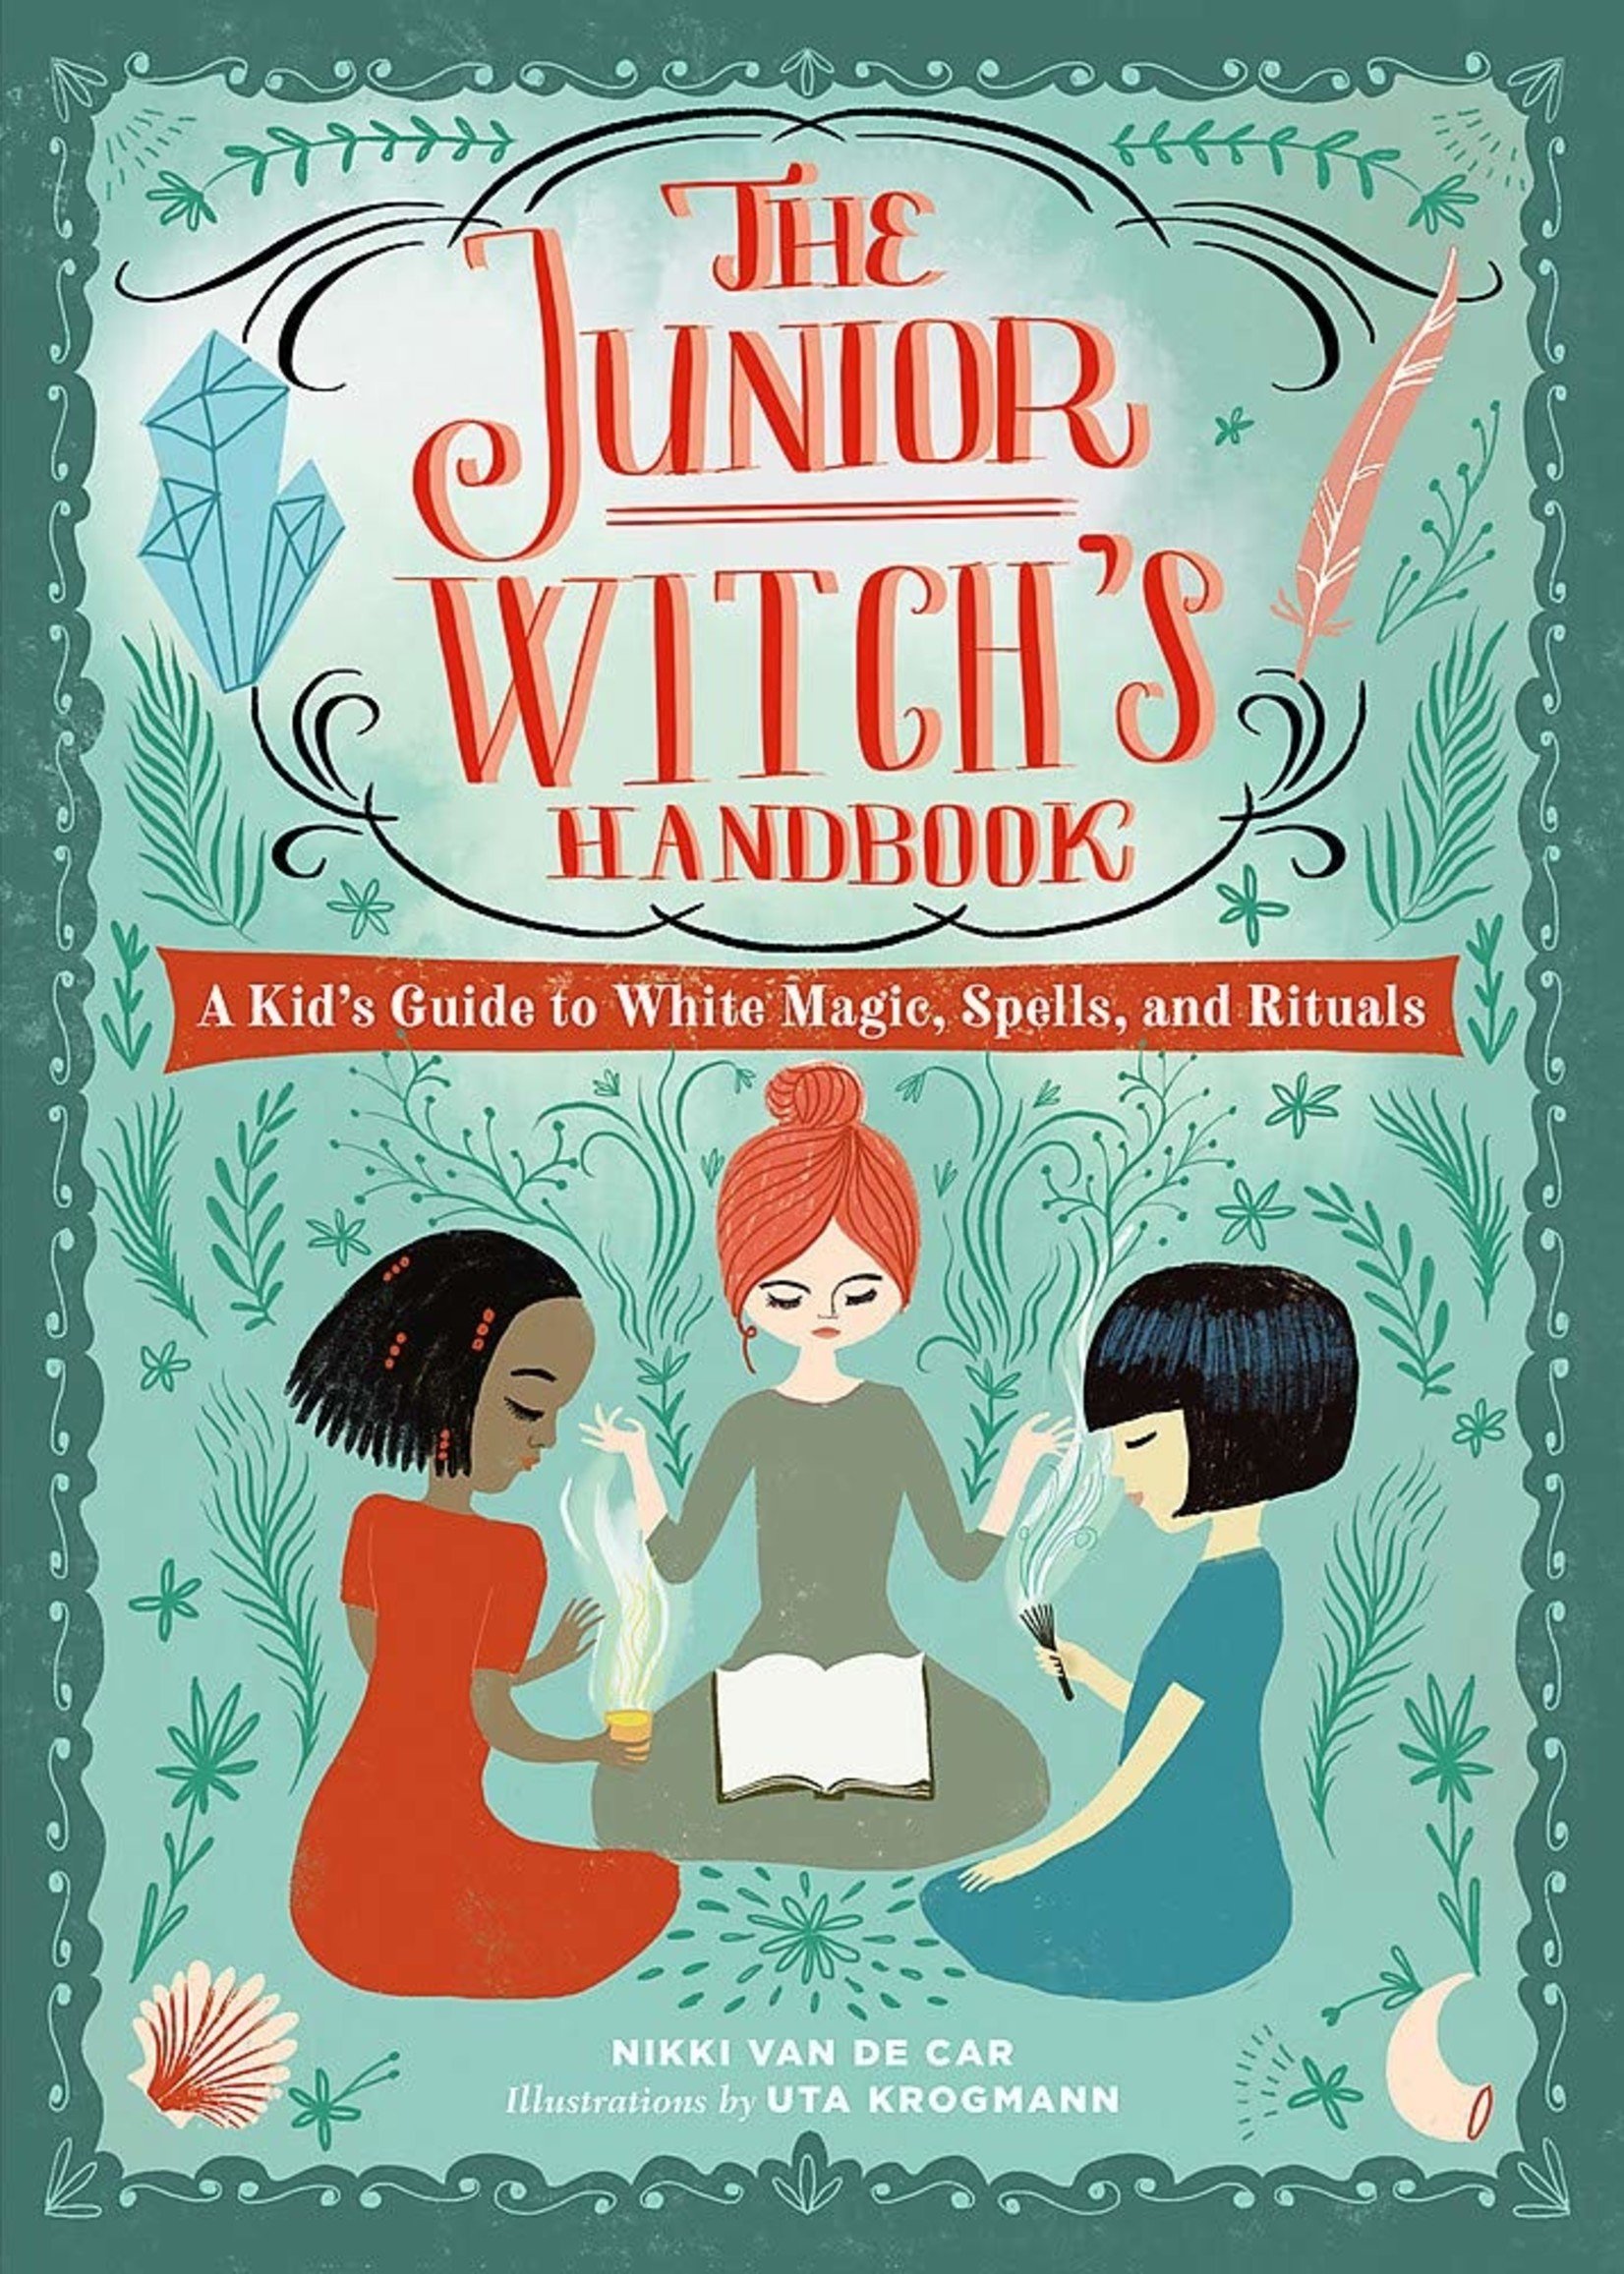 The Junior Witch's Handbook: A Kid's Guide to White Magic, Spells, and Rituals - Hardcover